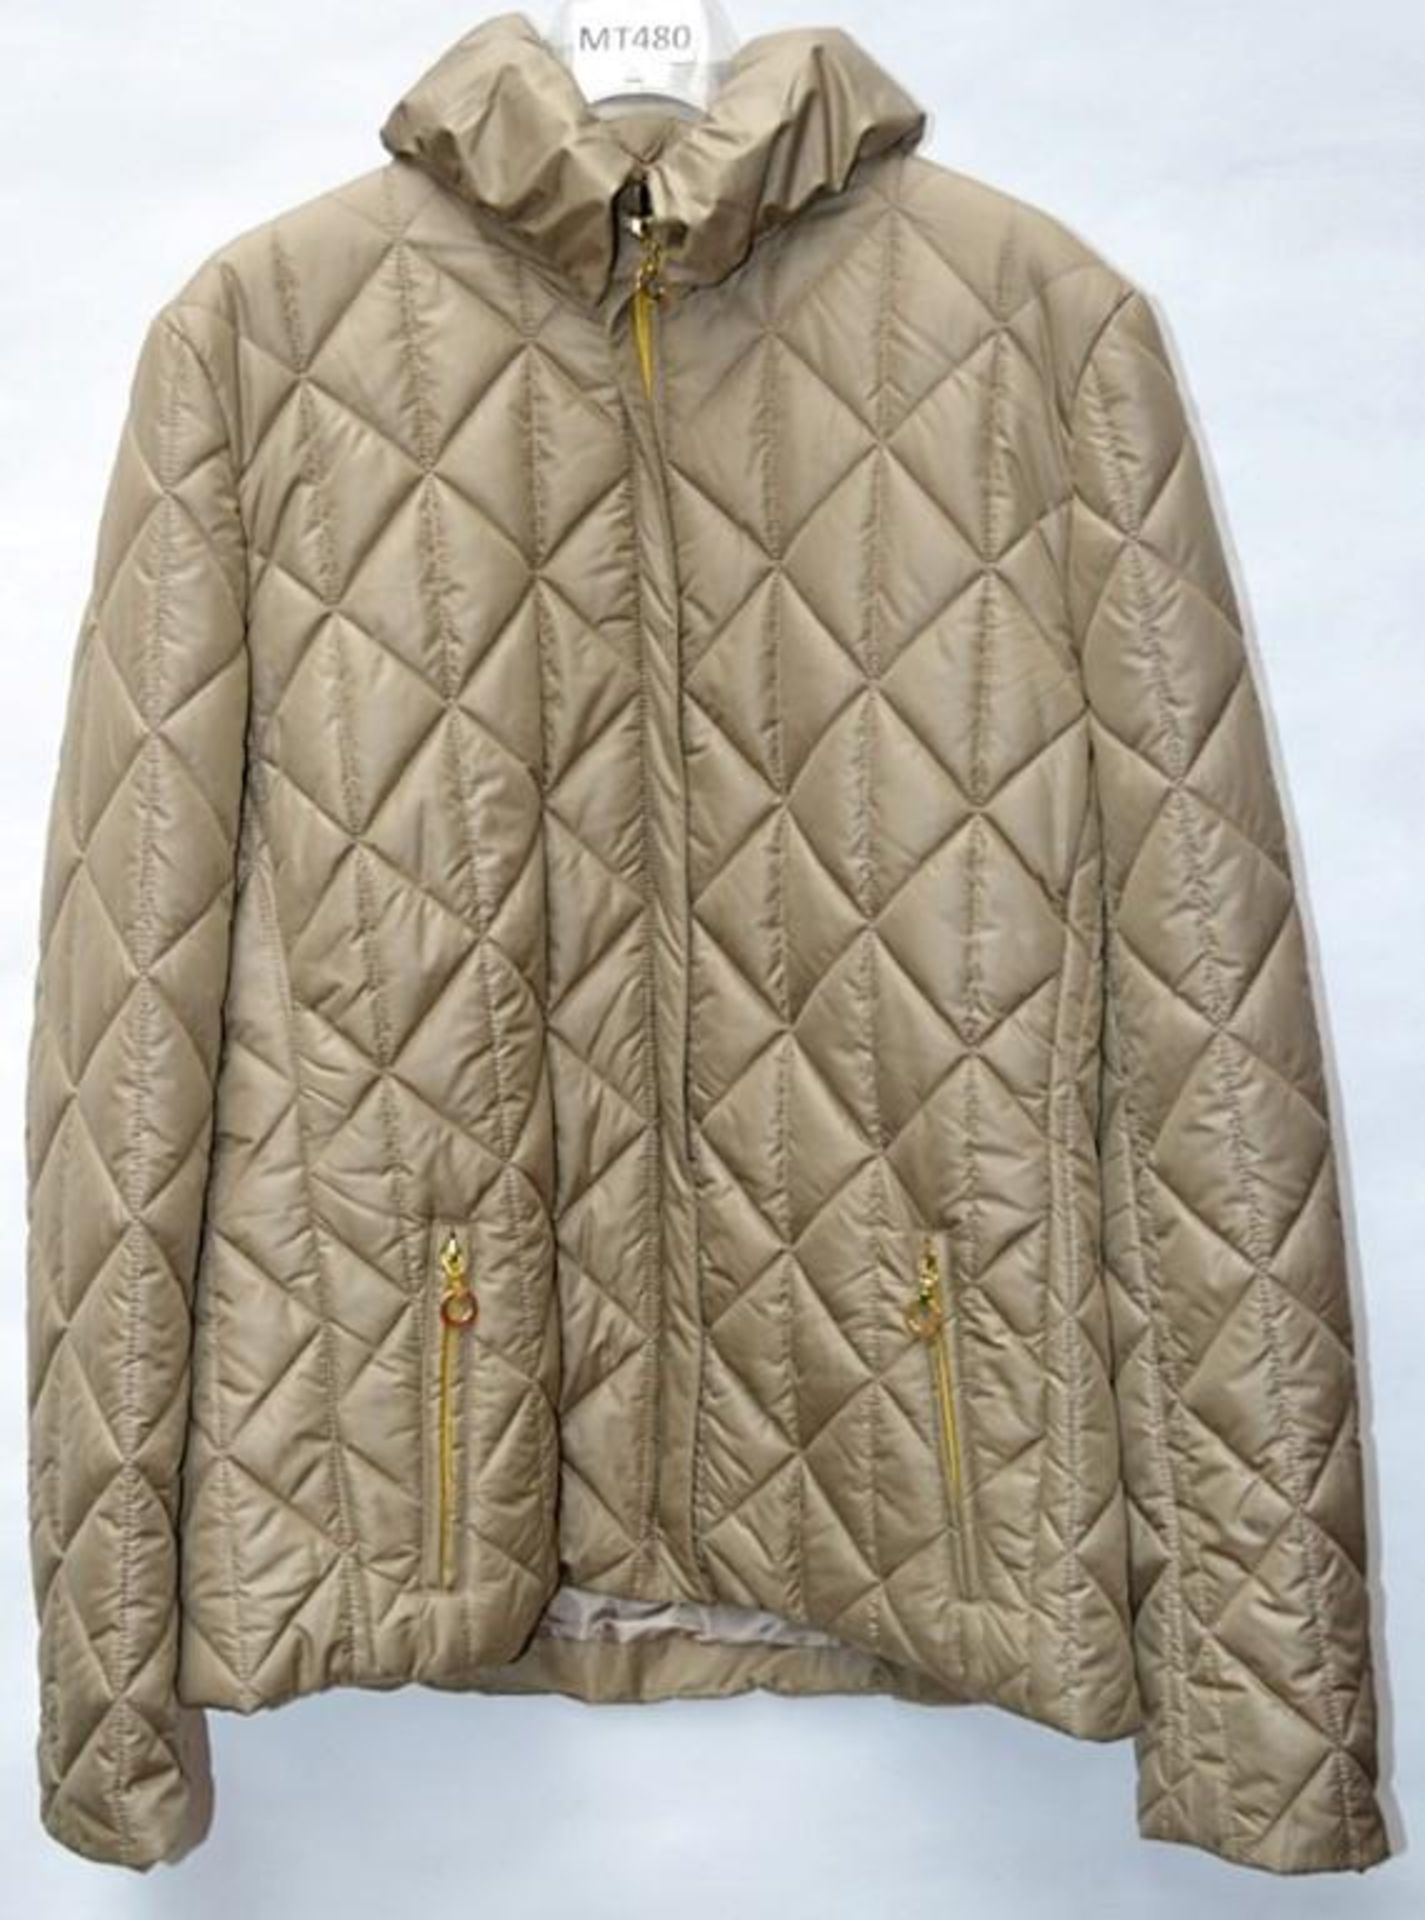 1 x Steilmann Womens Padded Coat With Concealed Hood In Collar - Colour: Bronzed Beige - UK Size 12